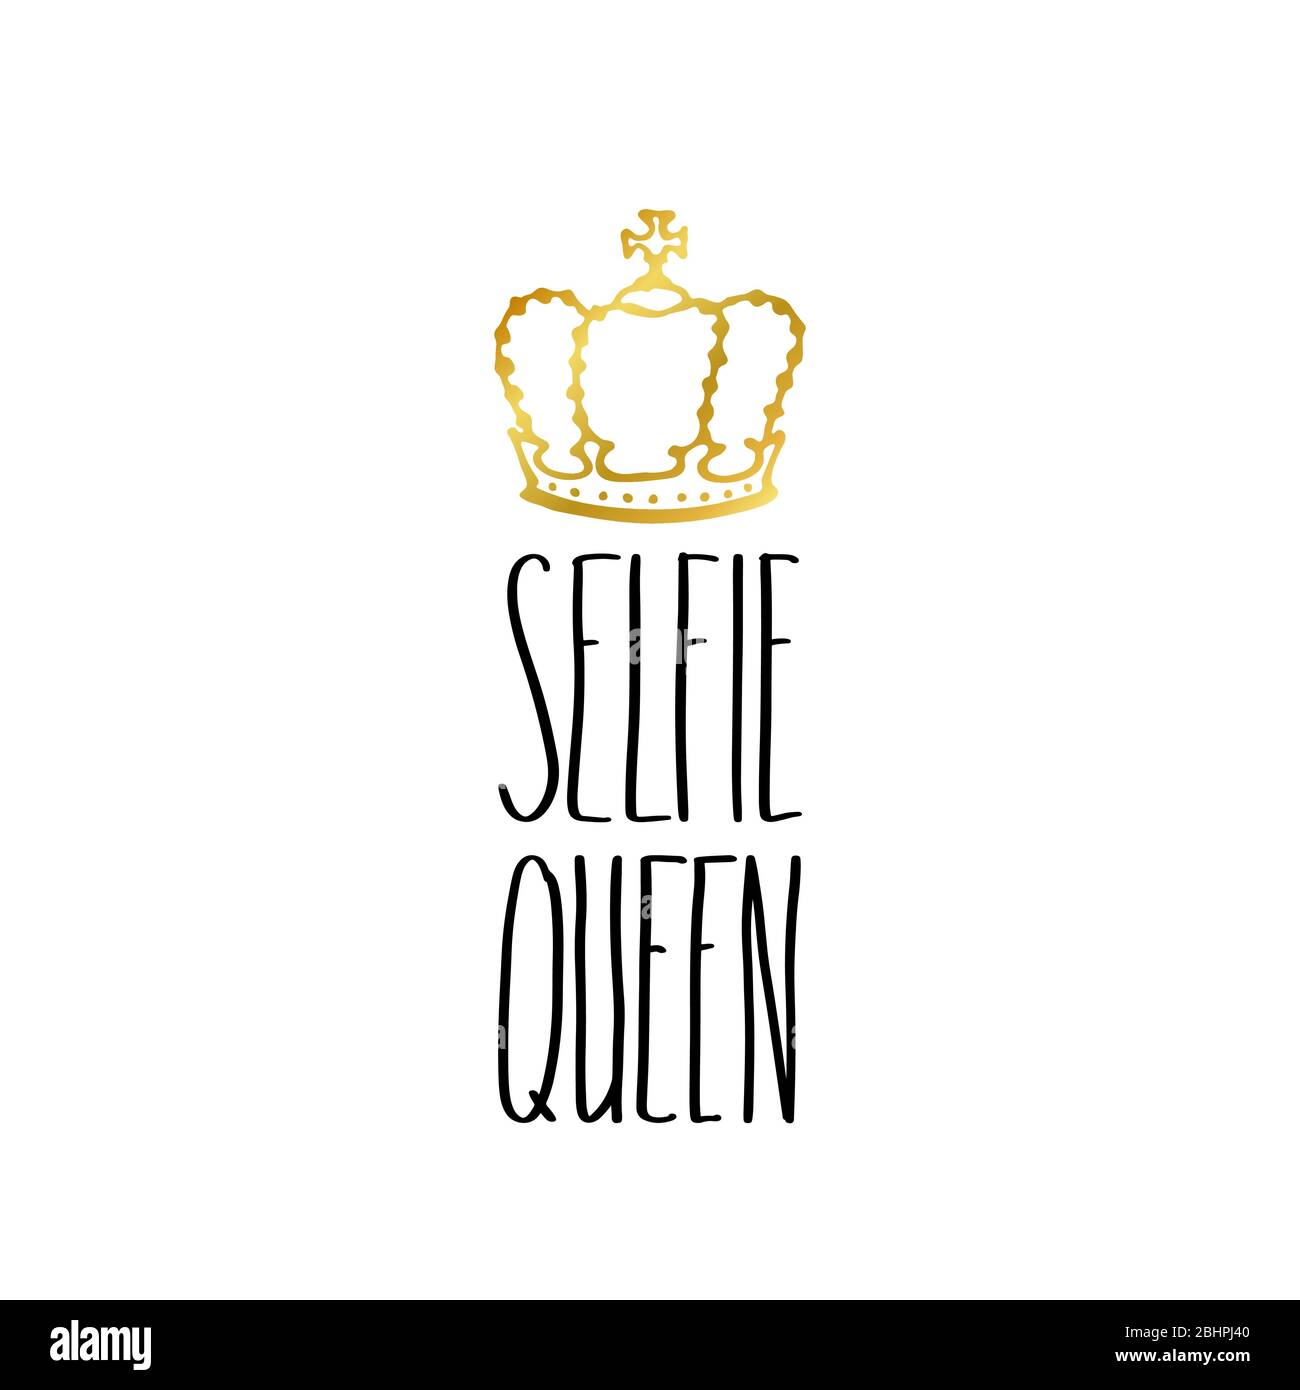 Selfie Queen print in simple hand drawn doodle style. Trendy inscription, handwritten slogan. Girly lettering design for t-shirt prints, phone cases, mugs or posters. Vintage vector illustration Stock Vector